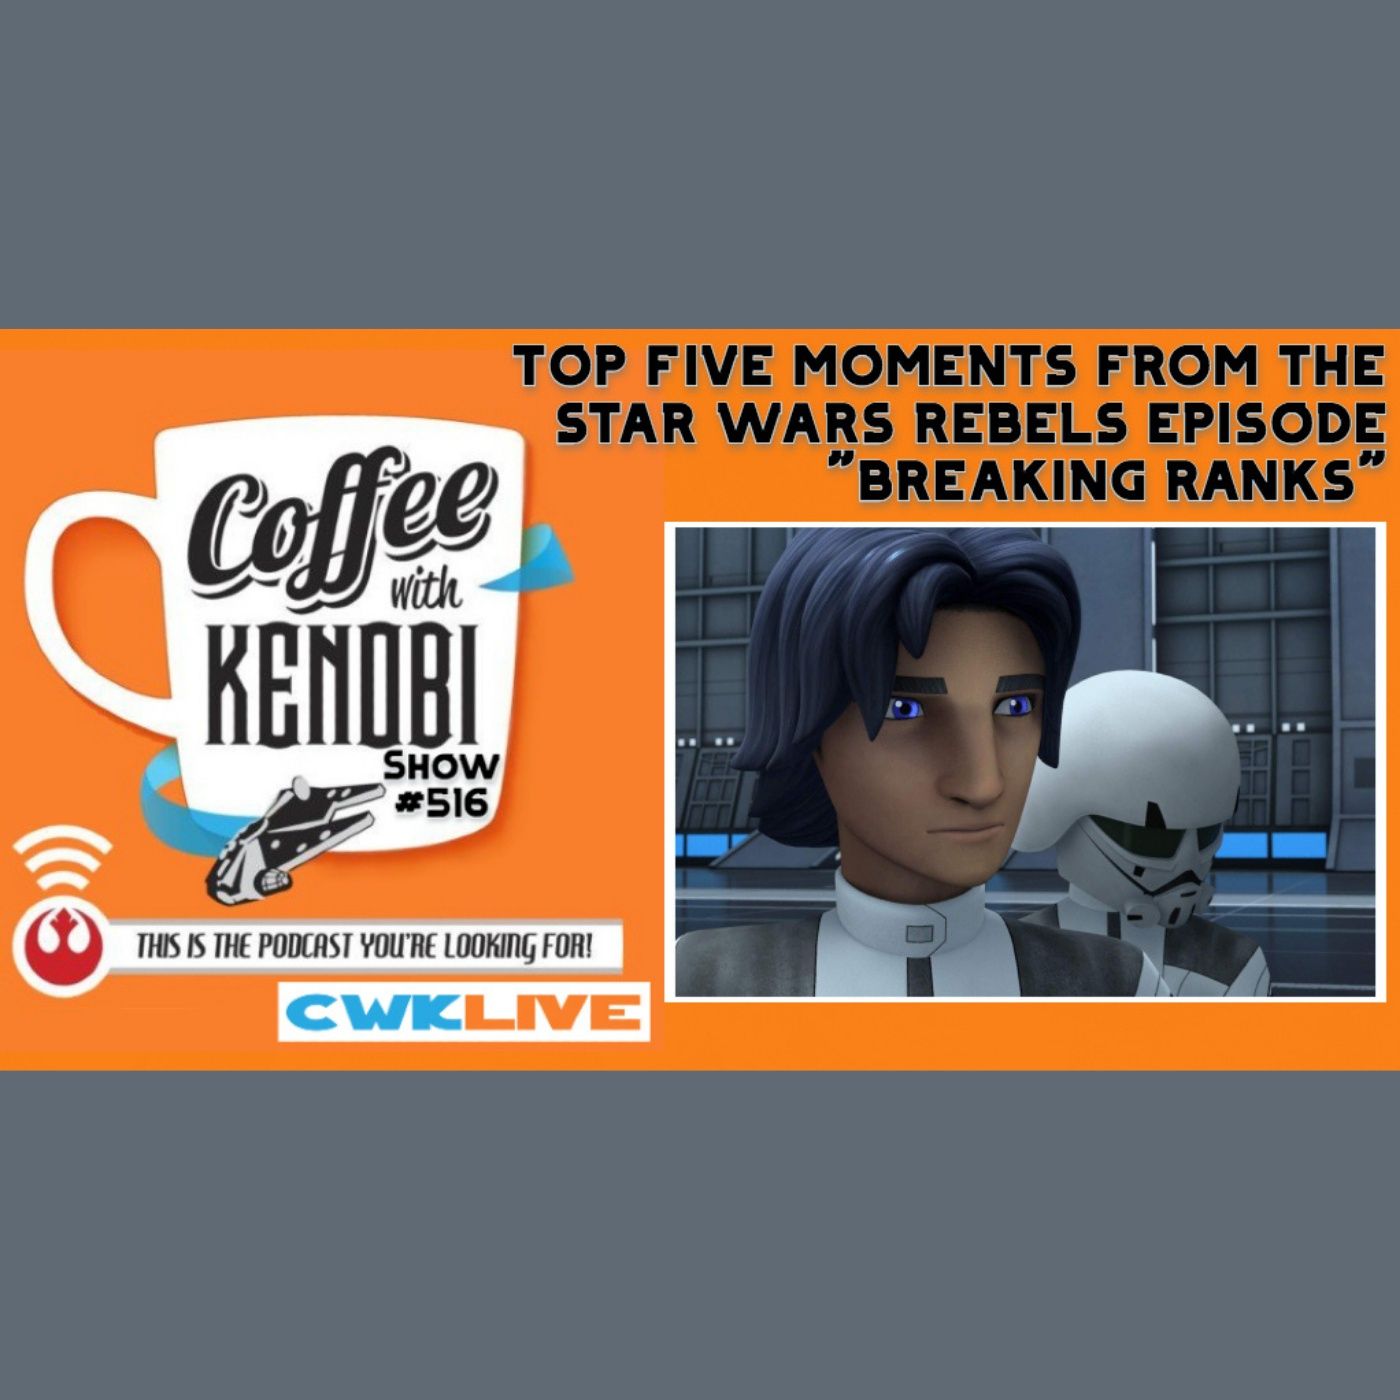 CWK Show #516 LIVE: Top Five Moments From Star Wars Rebels 